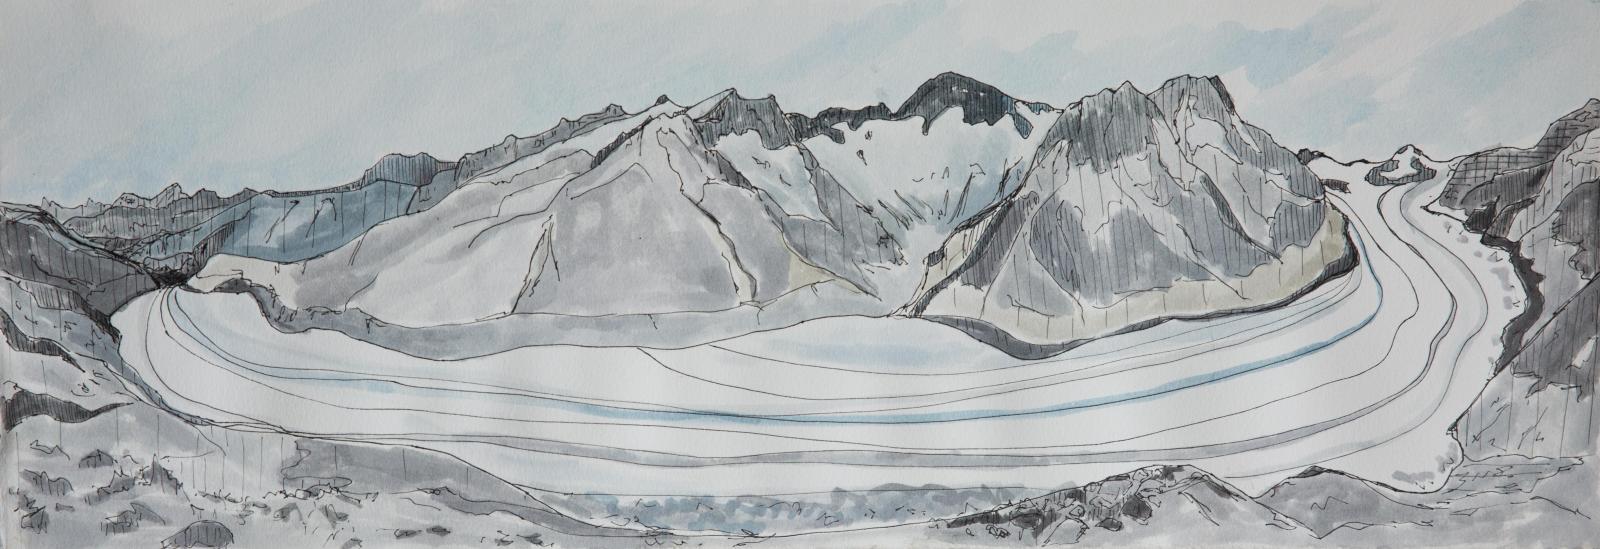 Image from glacial landscapes